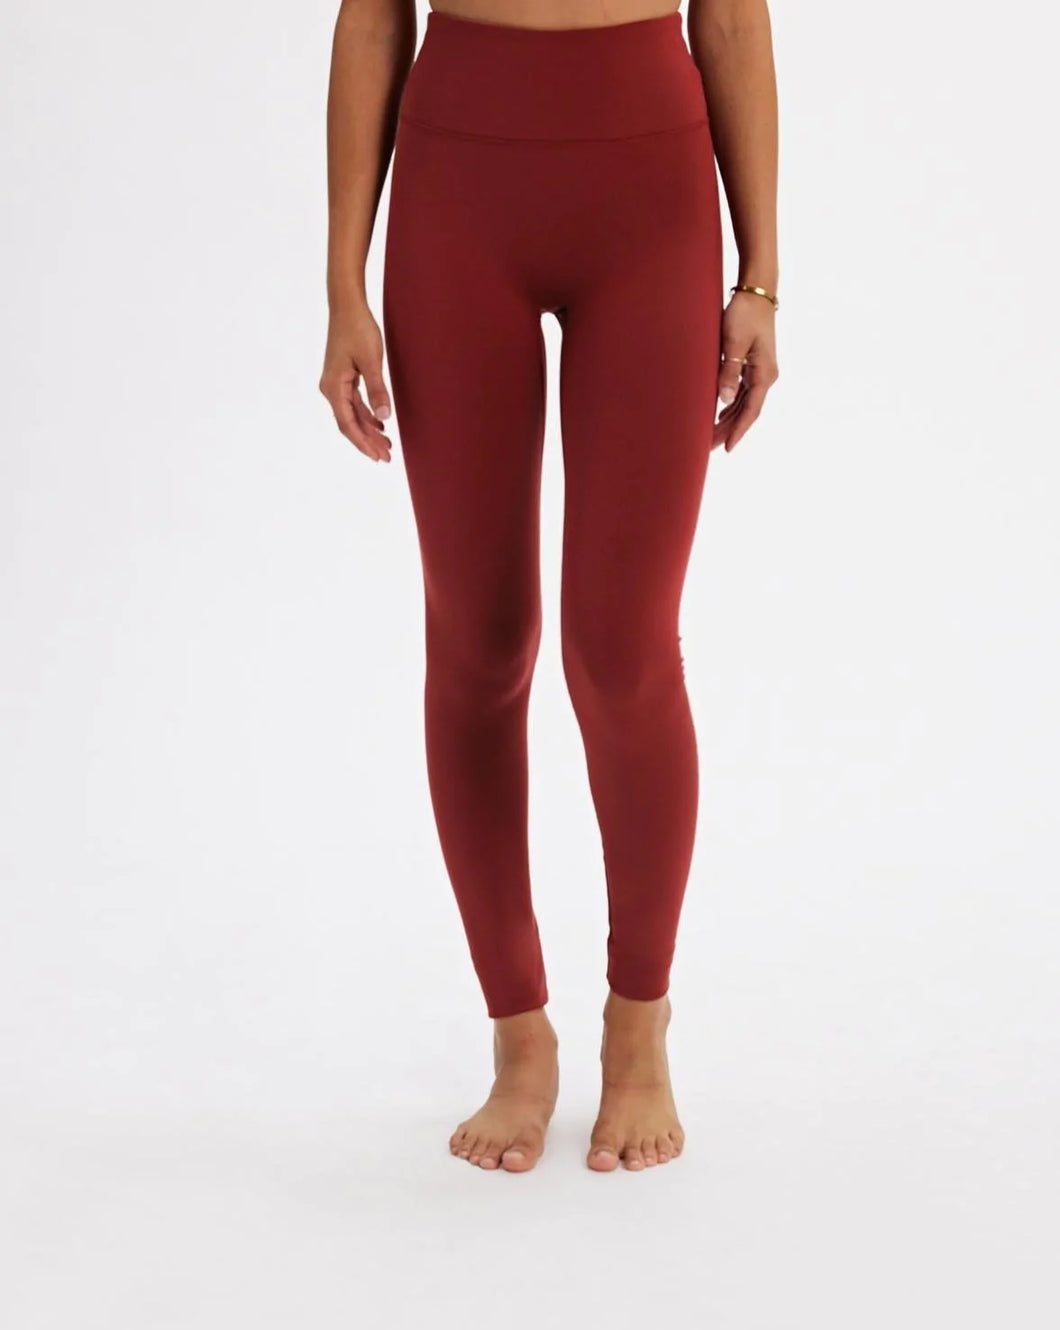 Luxe High-Rise Legging (Long Length) by Girlfriend Collective